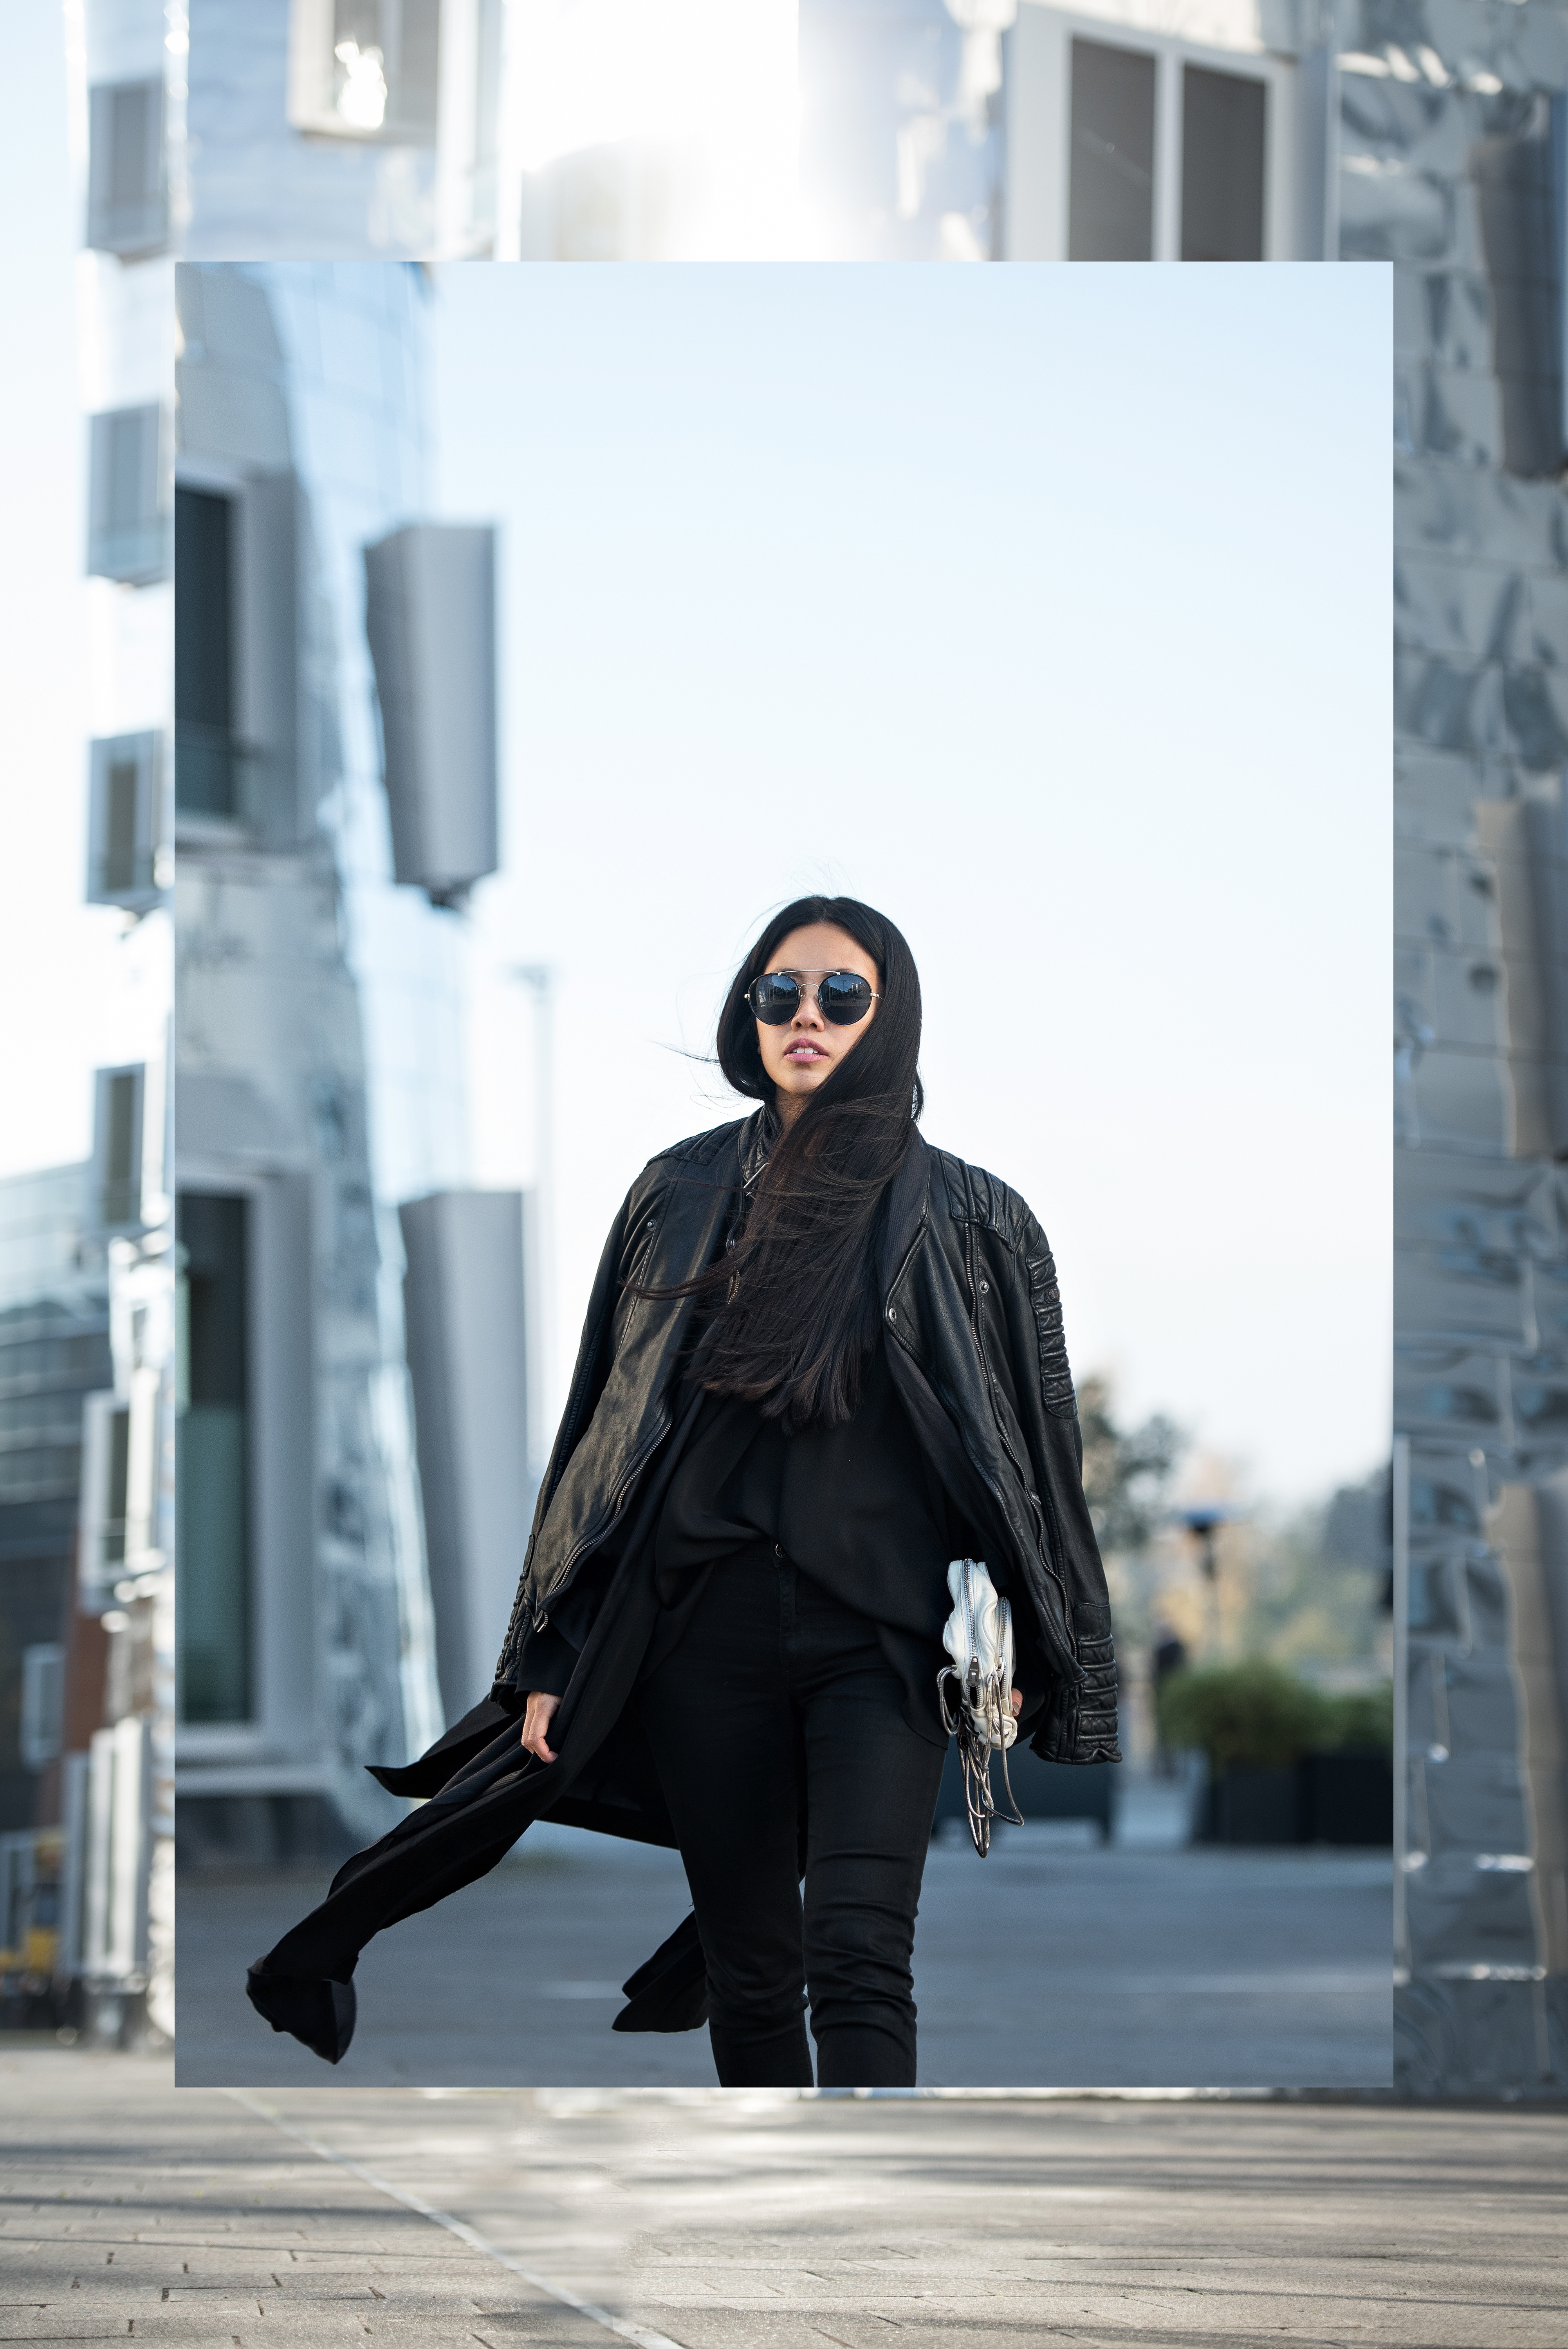 IHEARTALICE.DE – Fashion & Travel Blog: All Black Everything Look wearing tigha Leather Jacket, Skinny Jeans, Chelsea Boots / OOTD